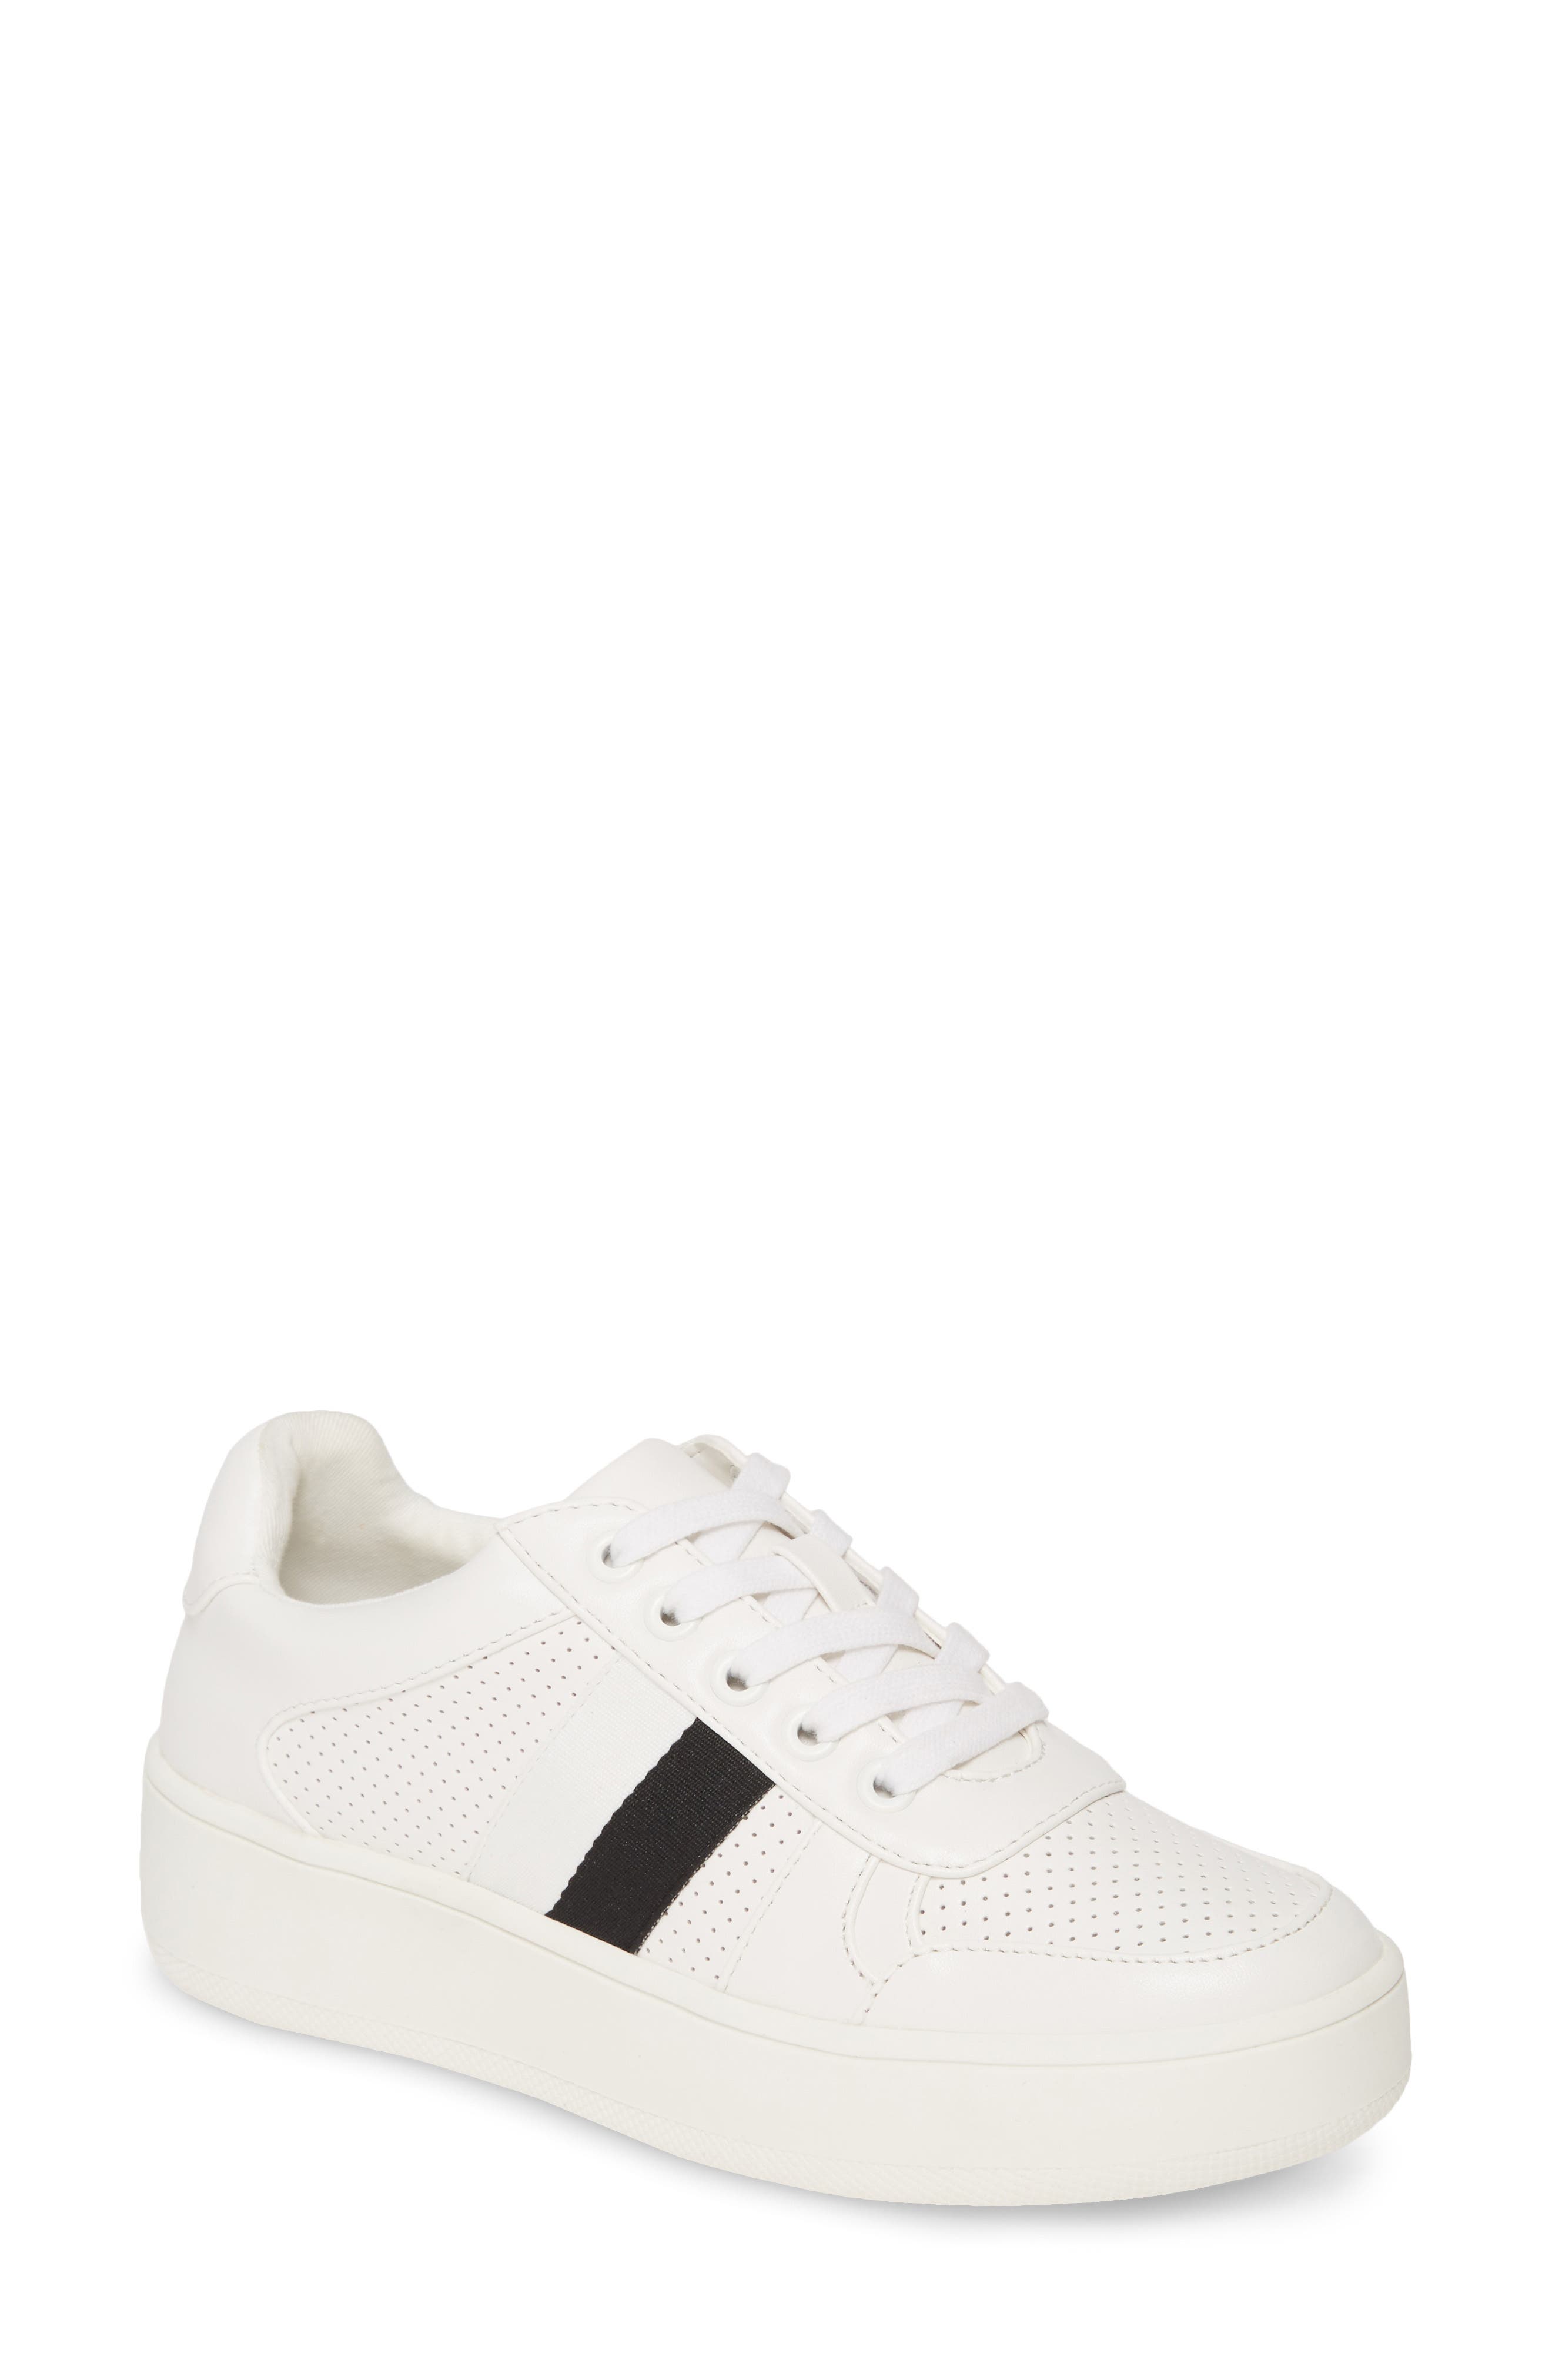 womens madden sneakers